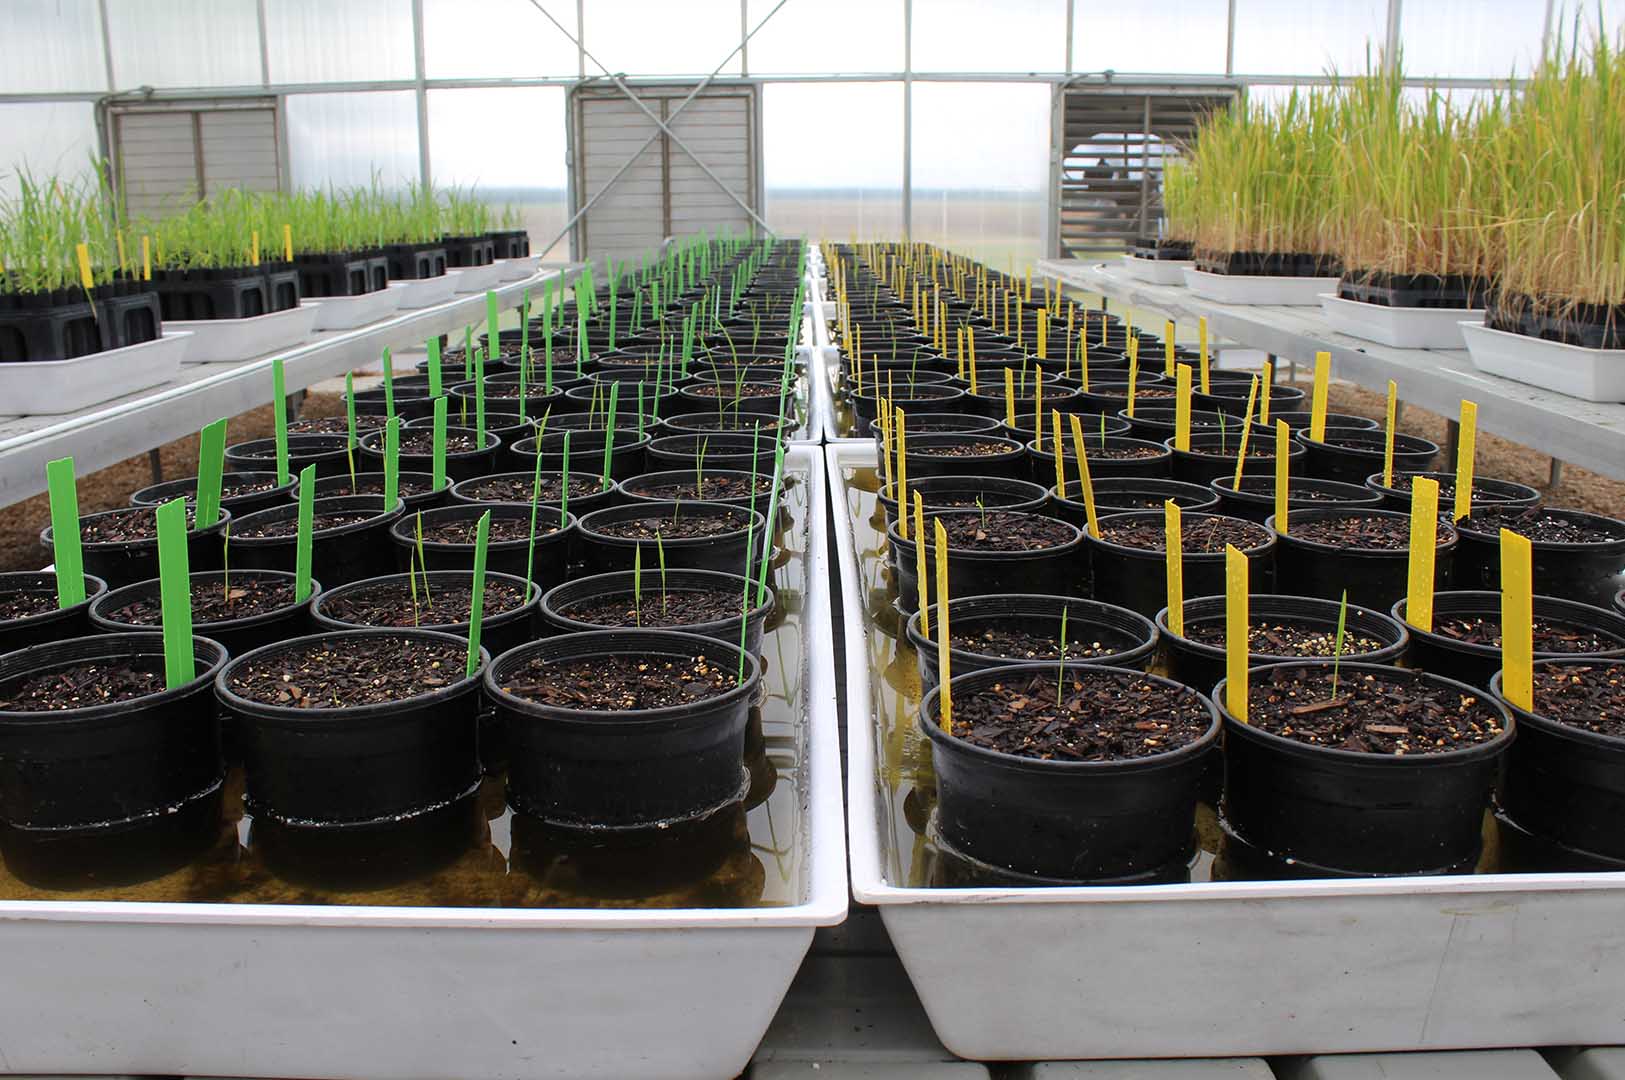 The MAFES rice breeding program currently has 2,500 breeding lines in observation testing, over 300 lines at the preliminary yield testing stage, and over 100 lines at the statewide and multistate testing stage. (Photo by Kenner Patton)